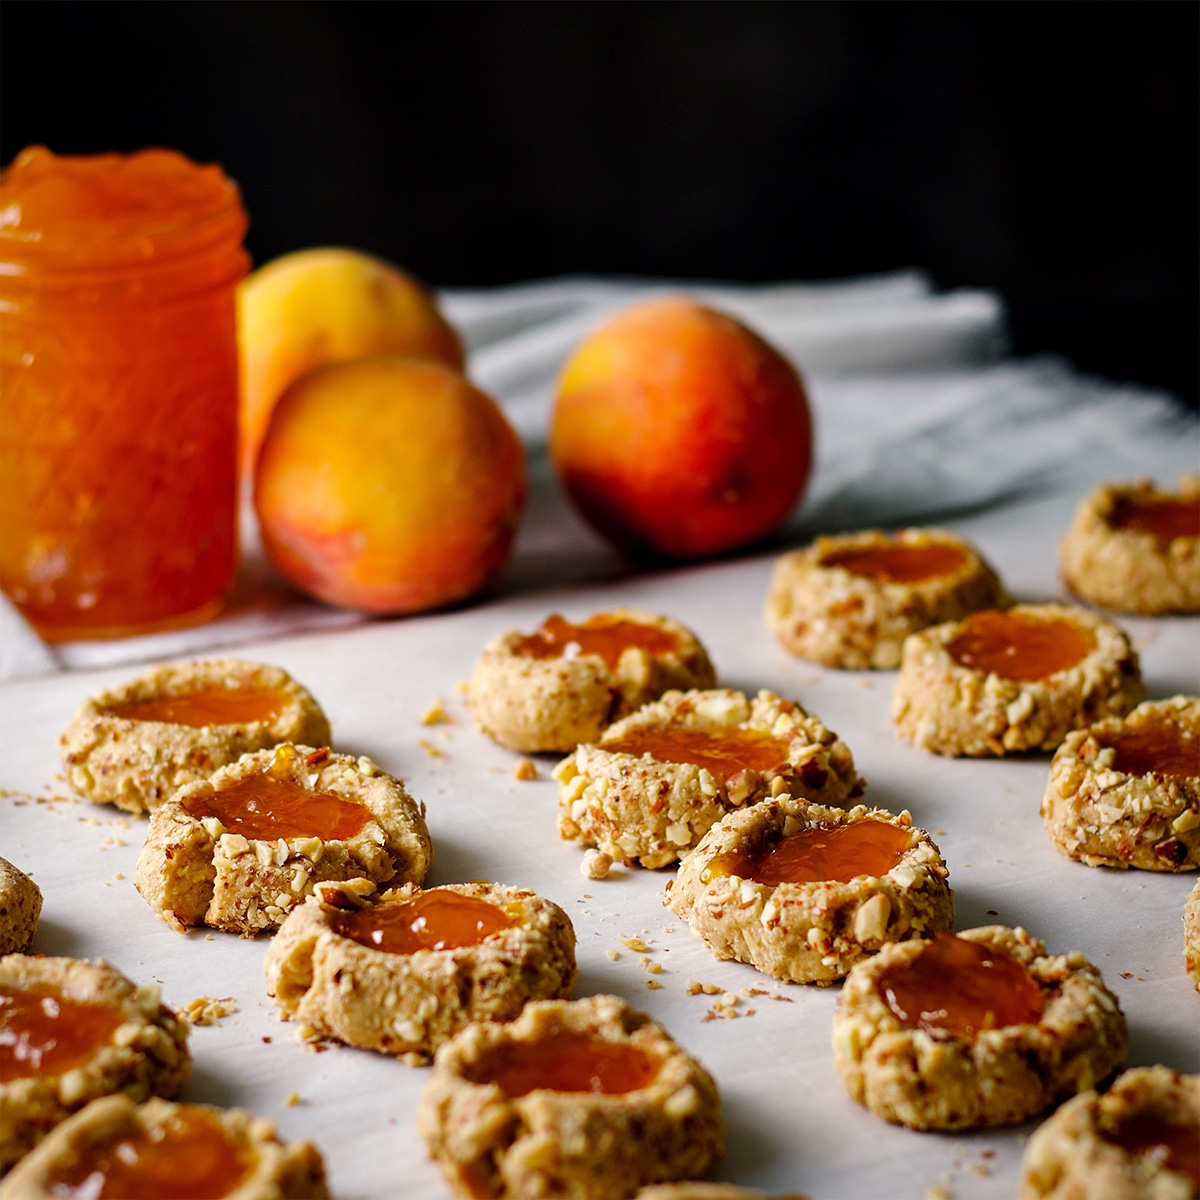 A tray of almond thumbprint cookies filled with peach preserves ready to bake.